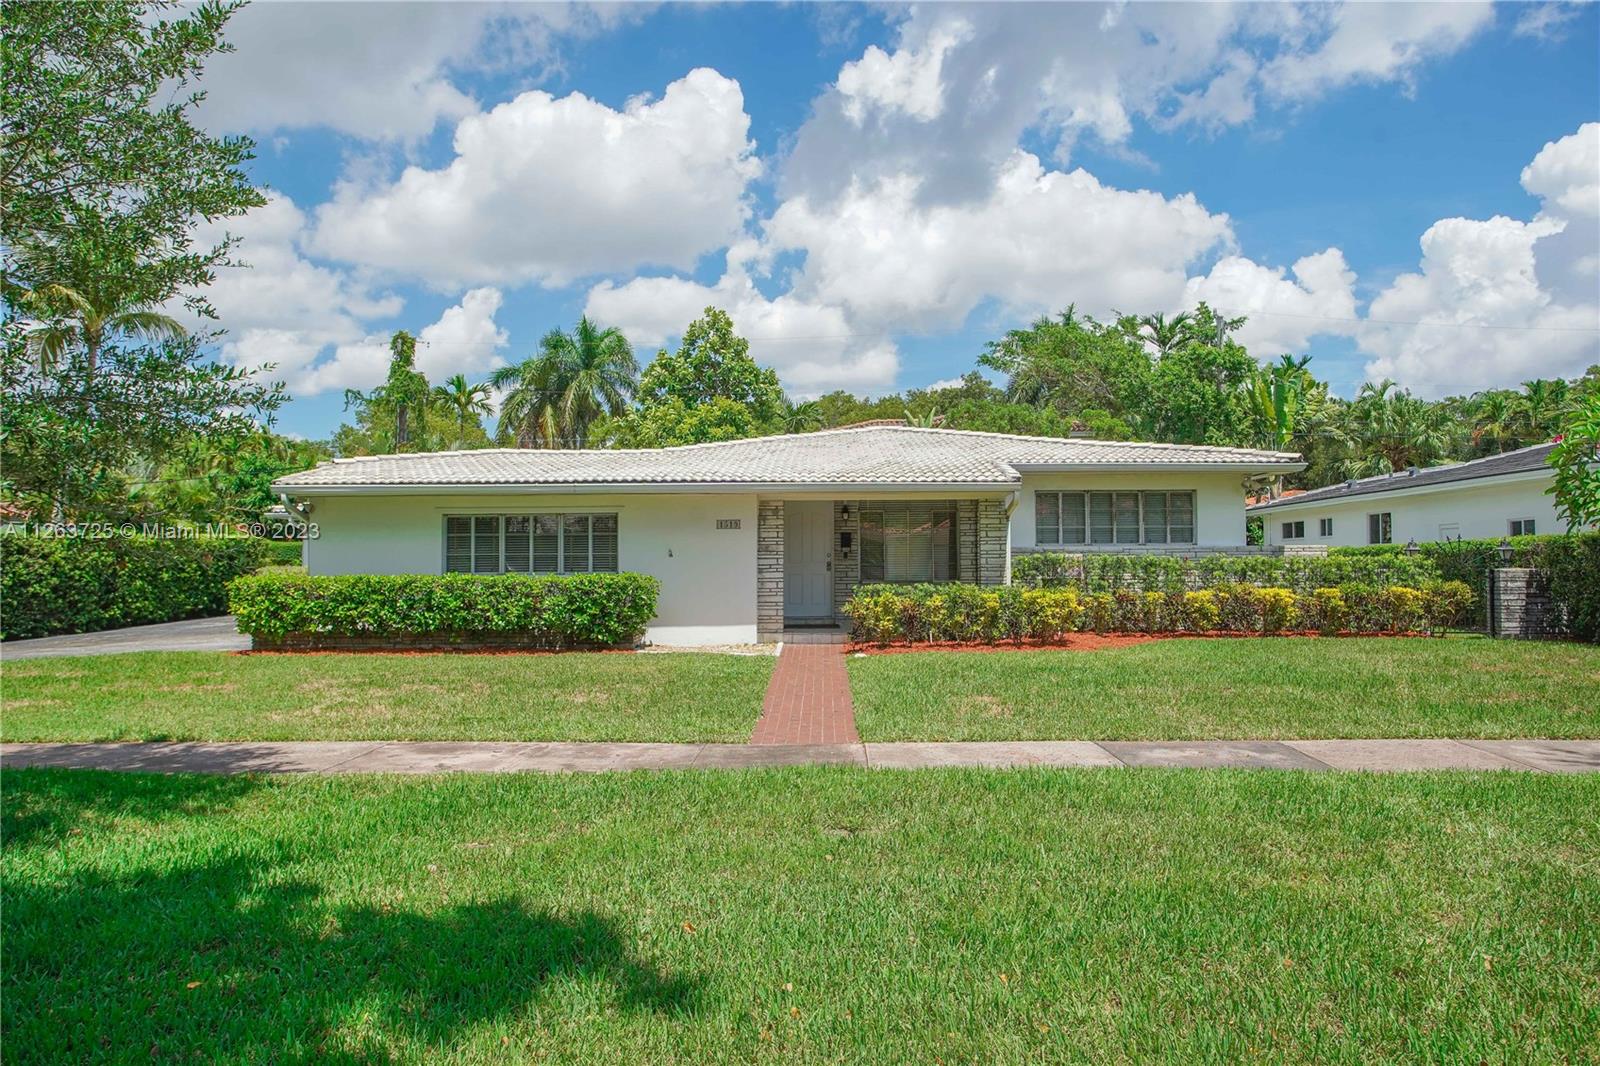 PRICE ADJUSTED for this home in a large lot with room for pool. This is a great opportunity to transform this spacious home with great curb appeal into the "Home of you Dreams in beautiful Coral Gables". This home, Sold-As-Is, sits on a street filled with beautiful trees and beautiful homes.  Close to great schools, 2 minutes to University of Miami, 2 minutes to Doctors Hospital, 20 minutes to Downtown Miami and to MIA, close to restaurants, shops, US1 and much more.  
Tremendous potential to update, expand or rebuild. Price includes plans for the remodeling transformation and are included as attachments. Room for pool. Easy to Show, see Brokers remarks for more information. Seller Motivated!
Homes next door with 1/2 the lot size and less sq/ftge have recently sold for 1.35m and 1.45m.